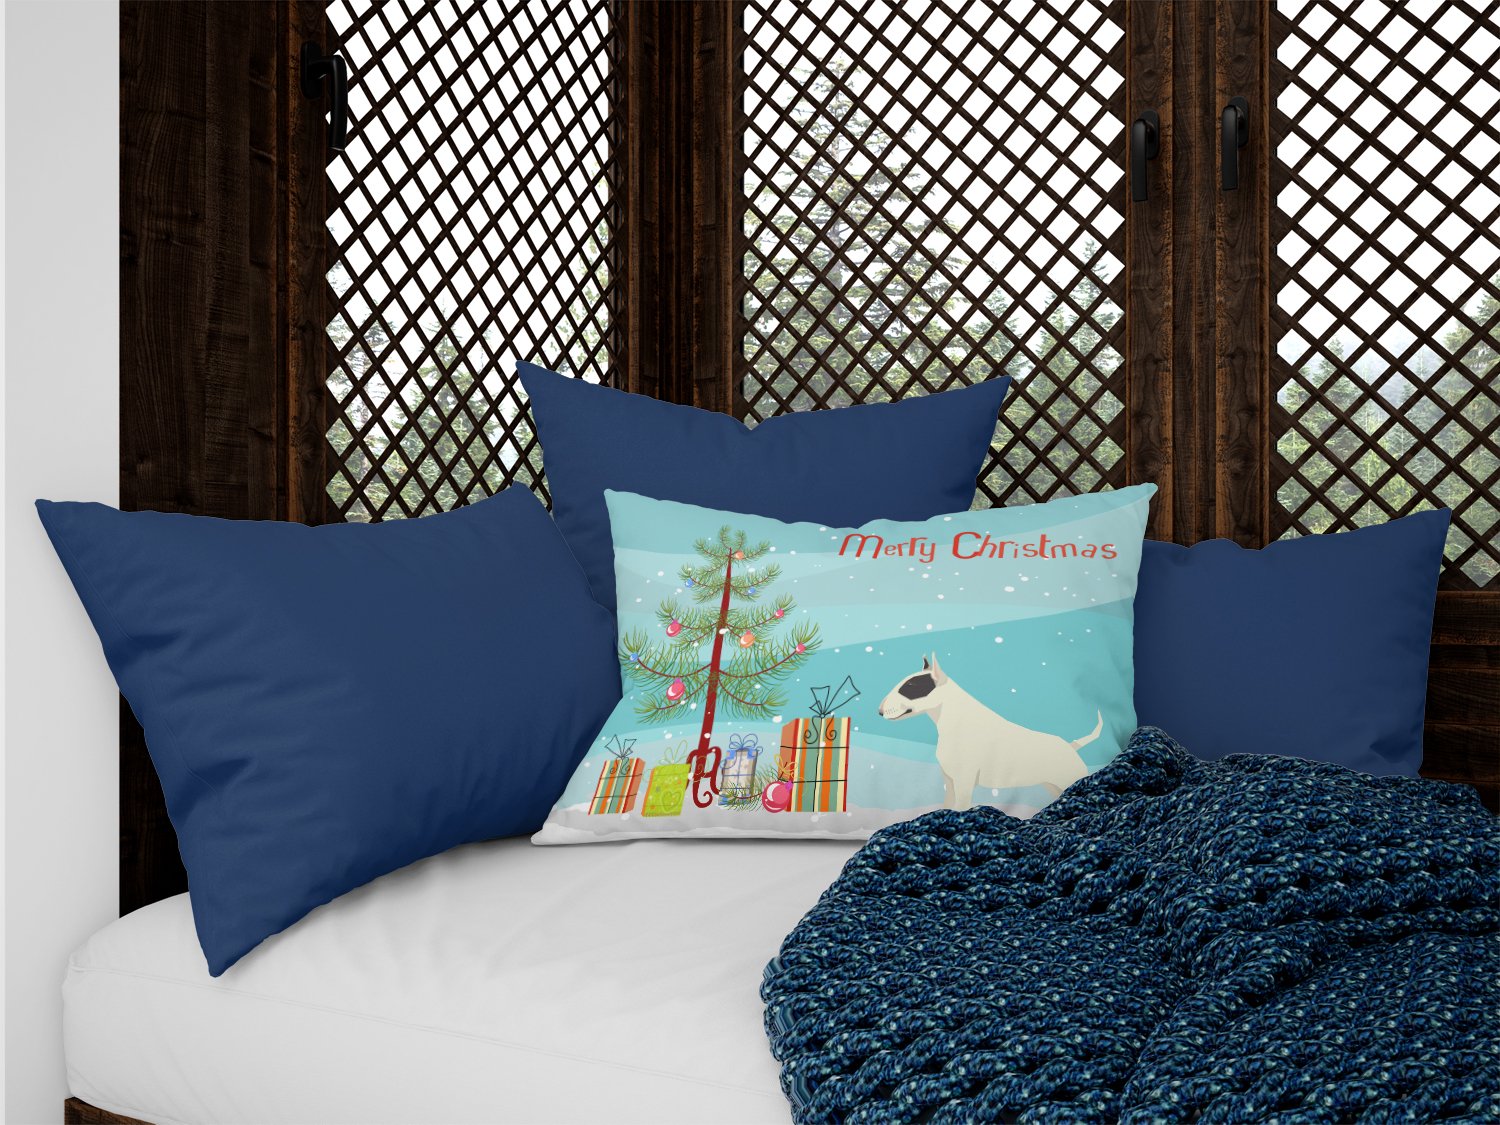 Black and White Bull Terrier Christmas Tree Canvas Fabric Decorative Pillow CK3527PW1216 by Caroline's Treasures